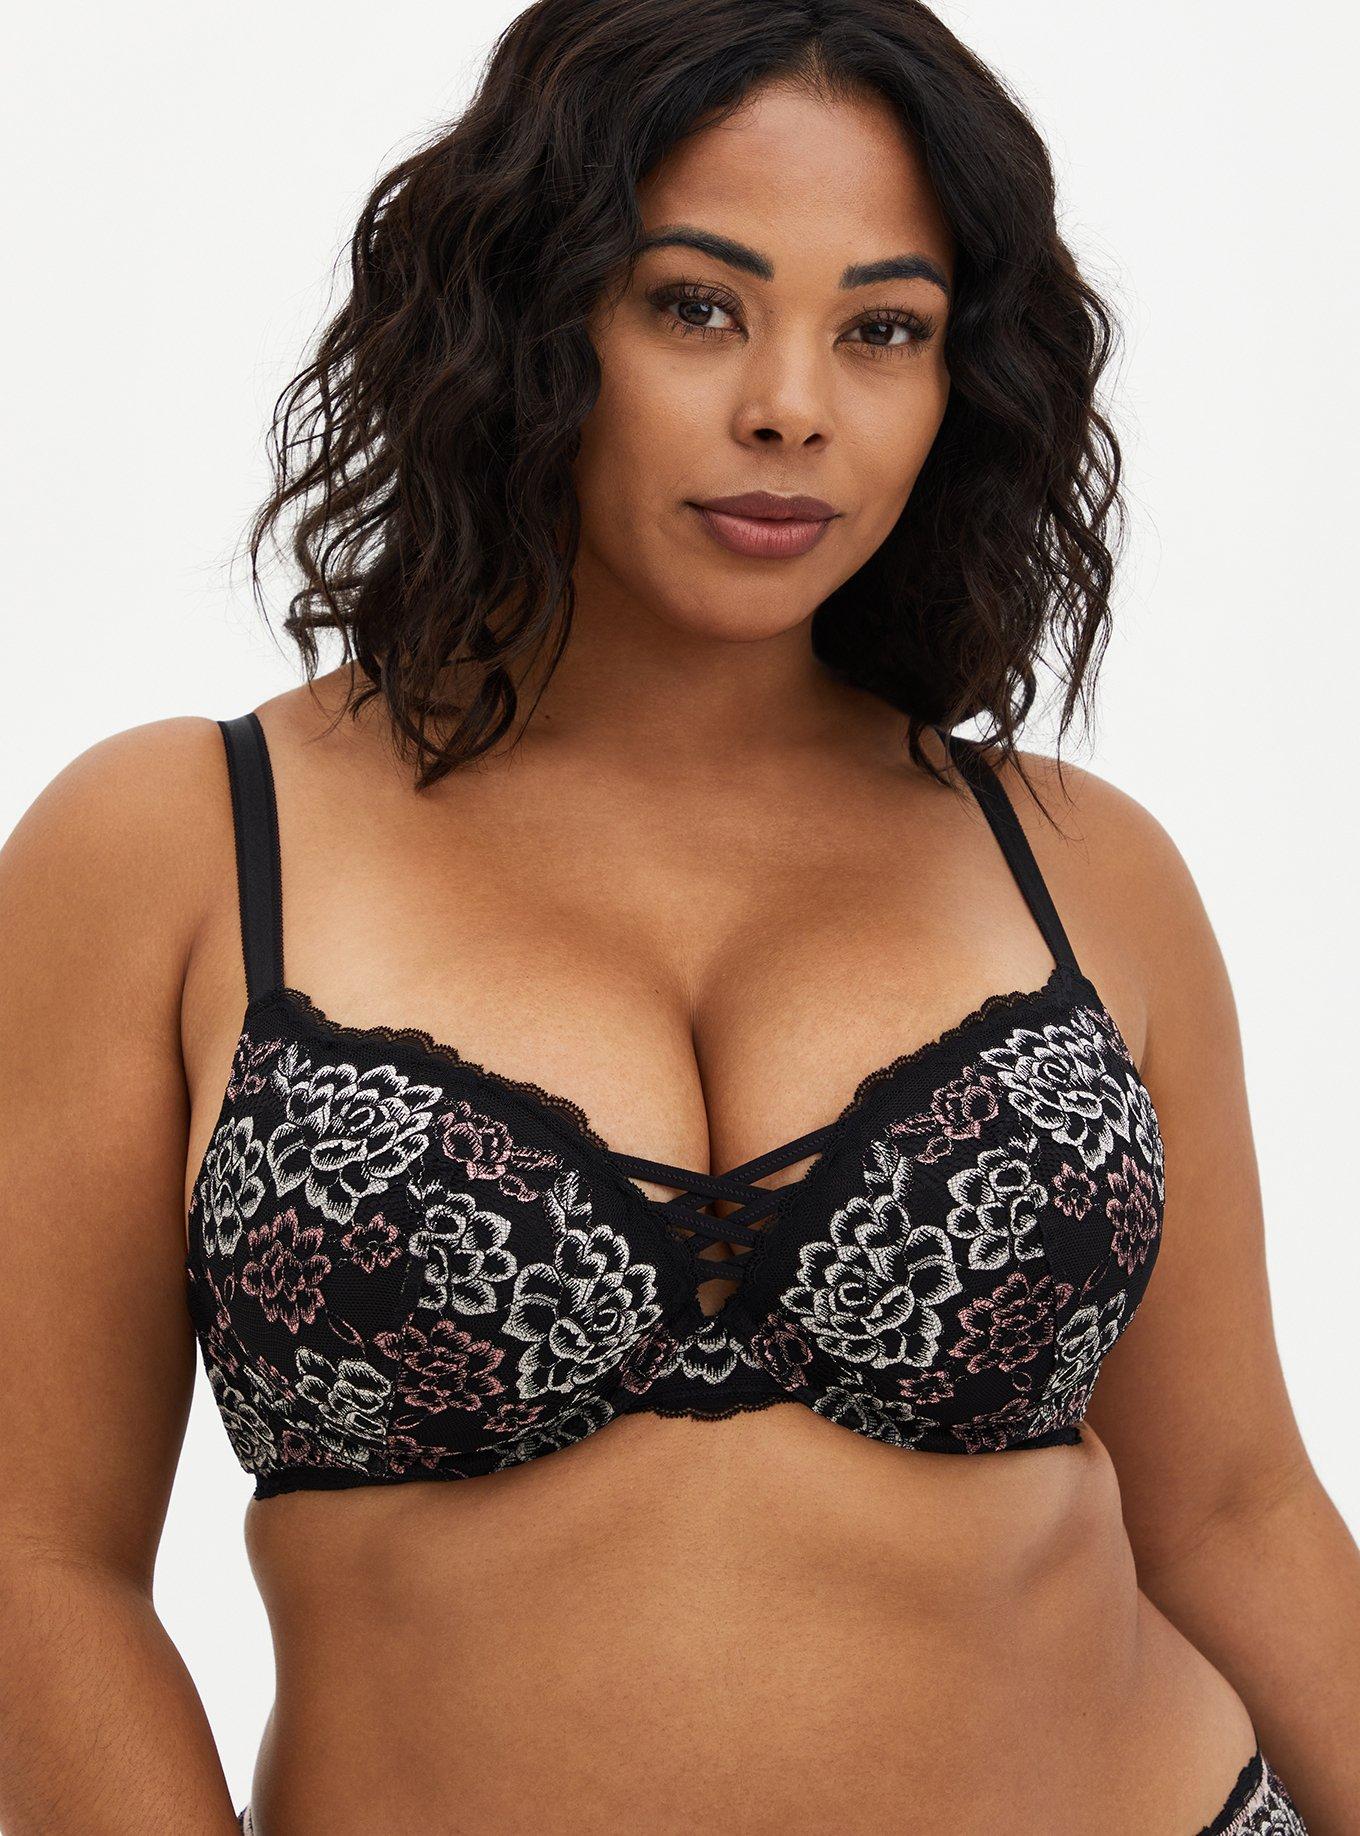 46ddd Bras, It is available in black and blush and often offers